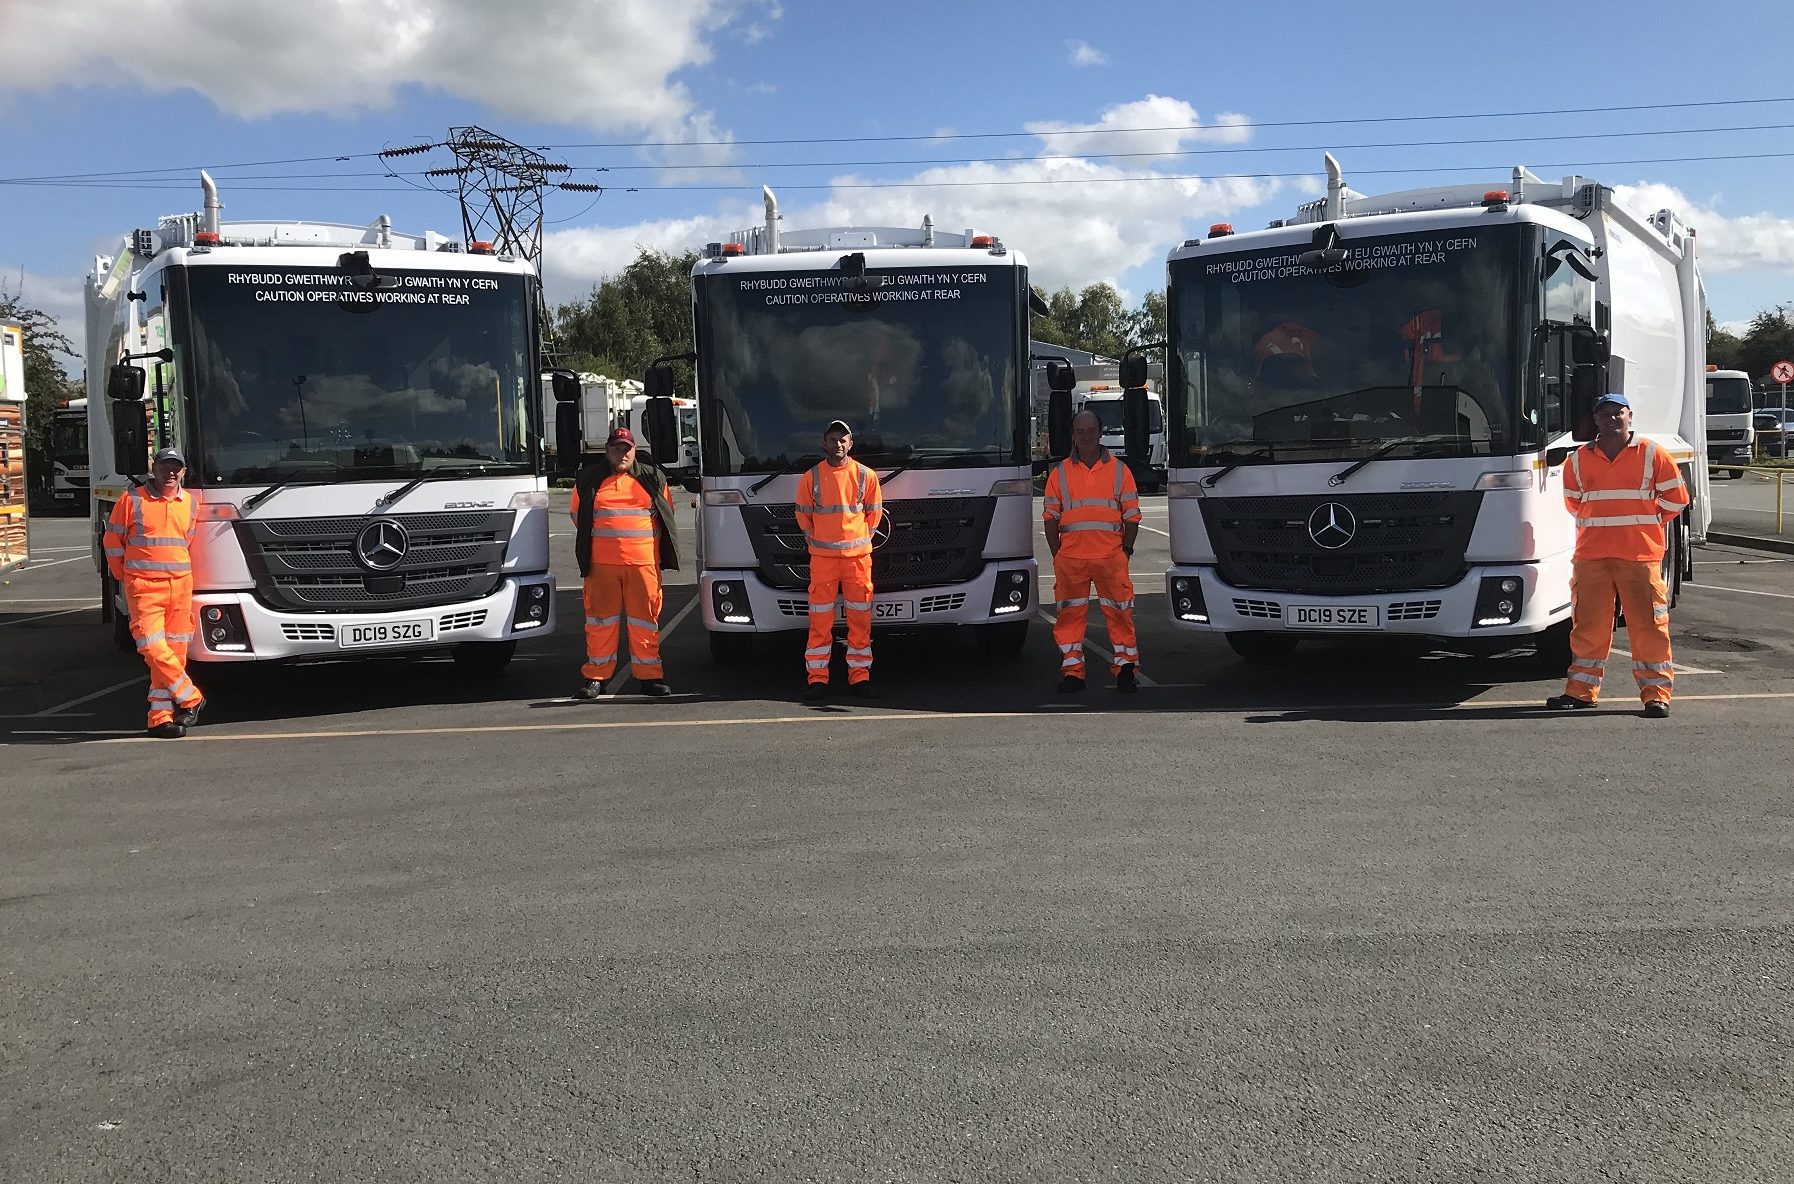 New lease of life for refuse vehicles